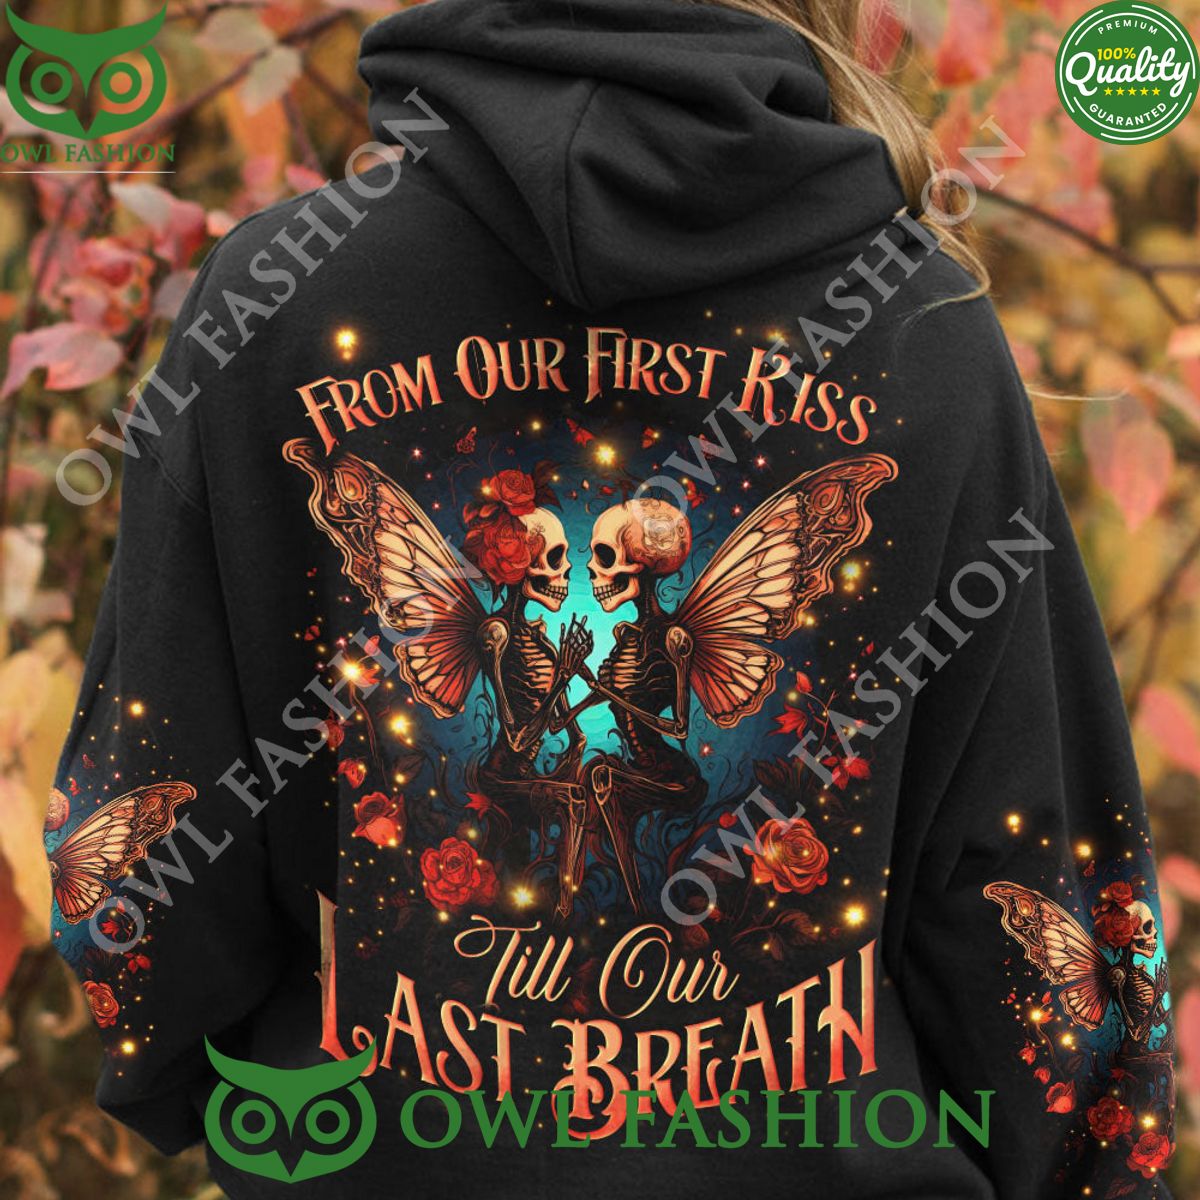 from our first kiss skull aop till our last breath rose hoodie 2 88I7I.jpg